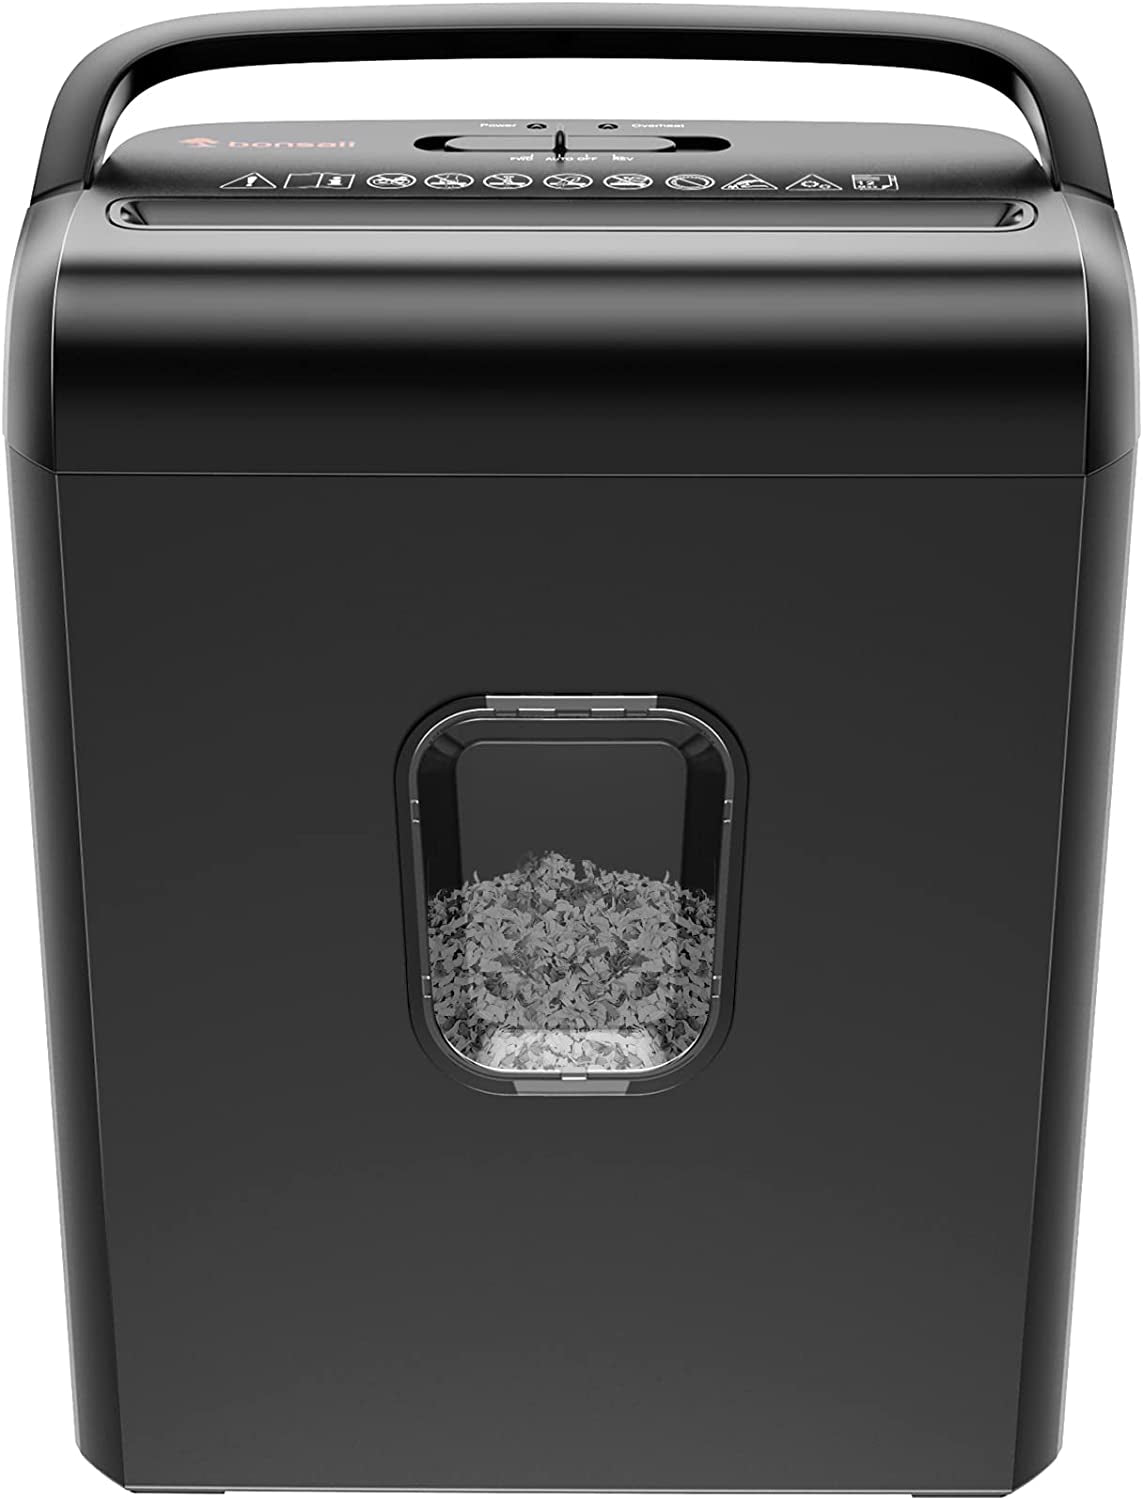 8-Sheet Cross Cut Shredder, P-4 High-Security Paper Shredder for Home & Small Office Use, Shreds Credit Cards/Staples/Clips, Portable Handle Design with 13-Litre Wastebasket, Black (C234-B)